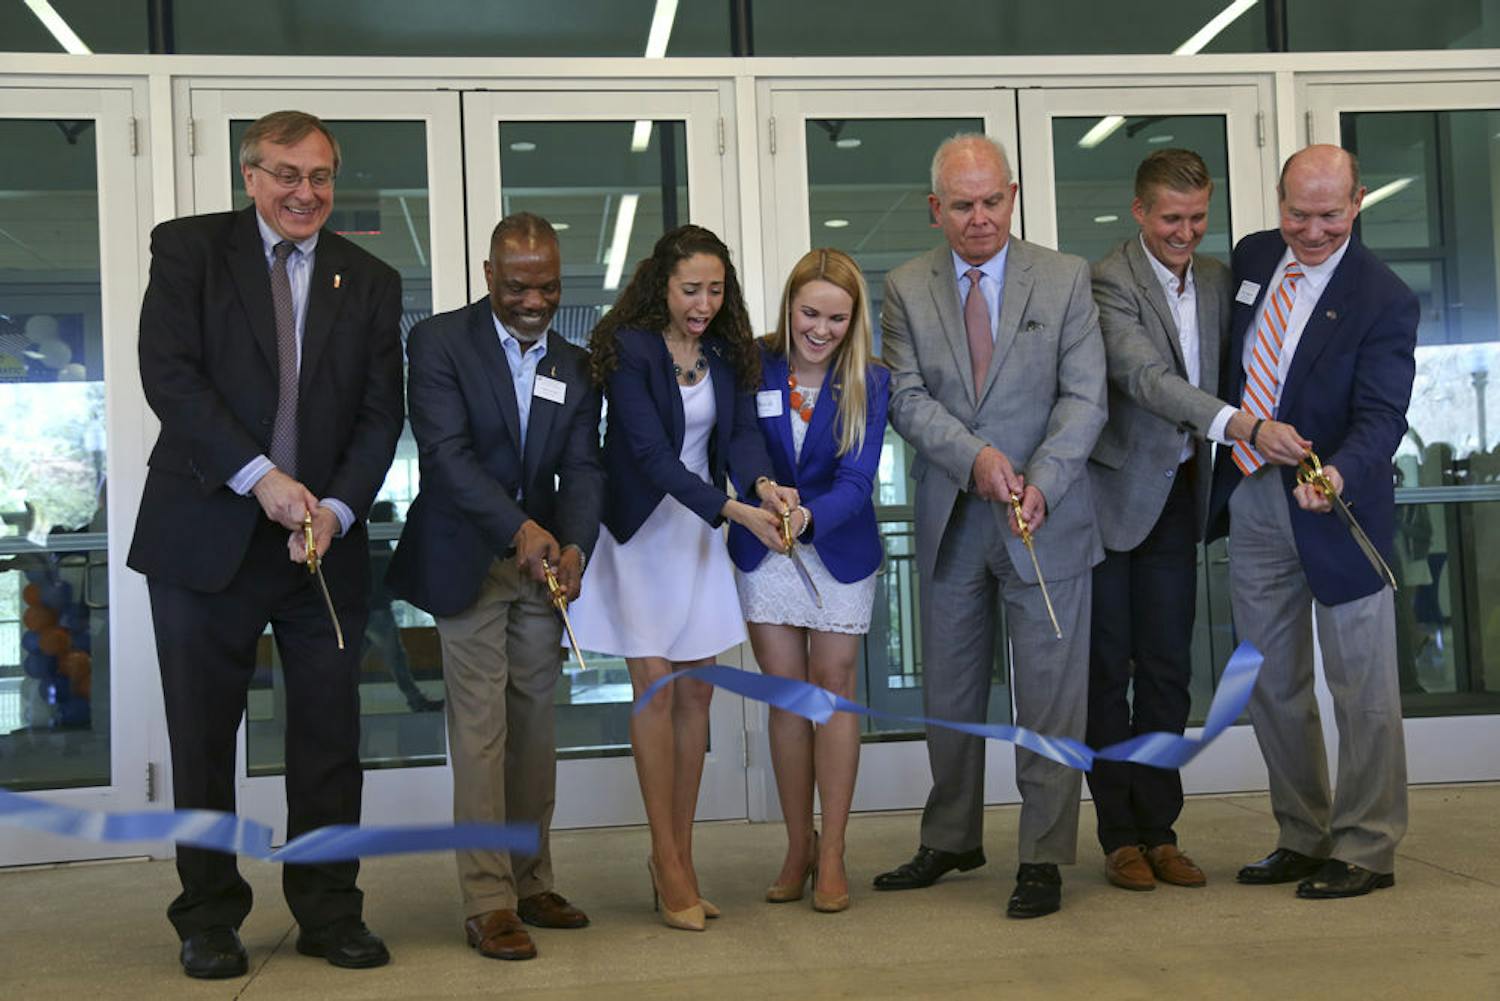 From left, UF President Fuchs, Reitz Union Executive Director Eddie Daniels, Student Body President Joselin Padron-Rasines, student advisory committee for the Reitz expansion project member Sarah Frick, Former UF President Bernie Machen, Former Student Body President Jordan Johnson and Vice President for Student Affairs Dave Kratzer cut the ceremonial ribbon at the grand reopening of the Reitz Union on Saturday.